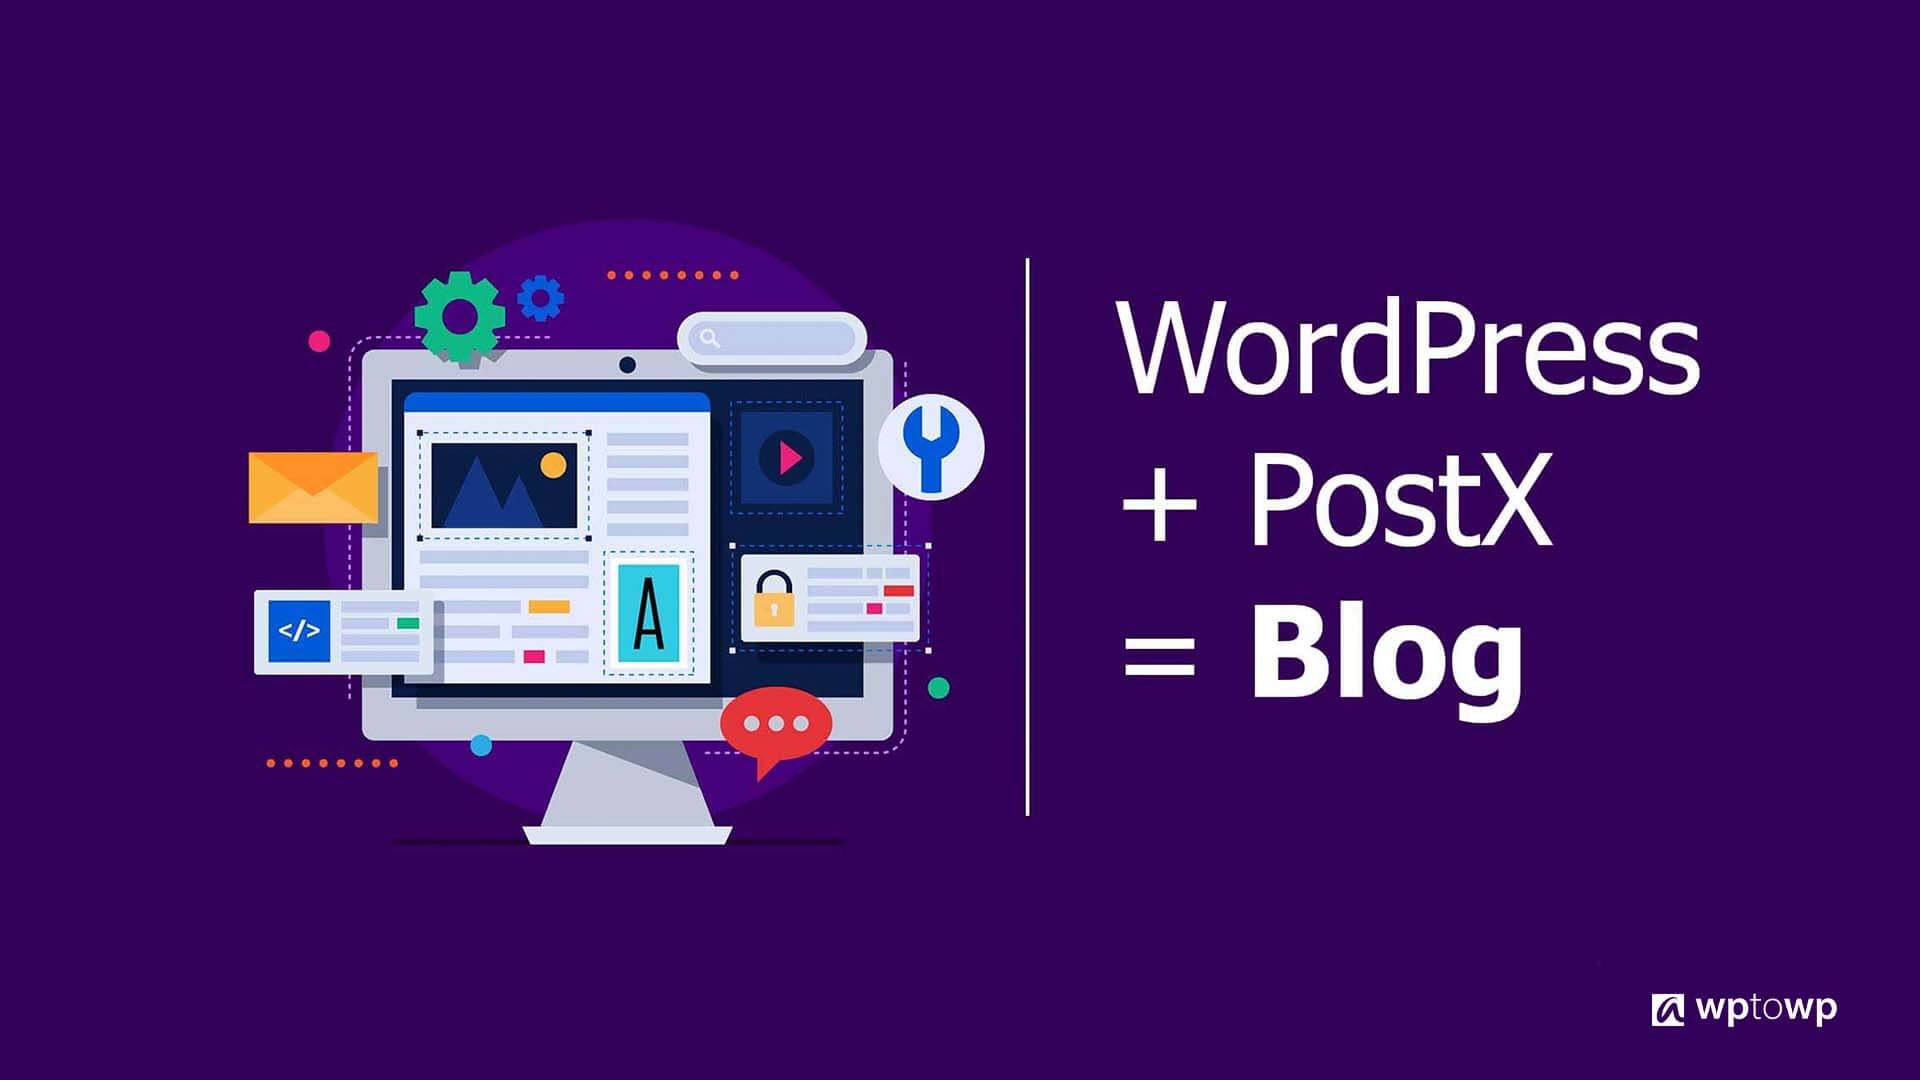 How to Create a Personal Blog Using WordPress, wptowp